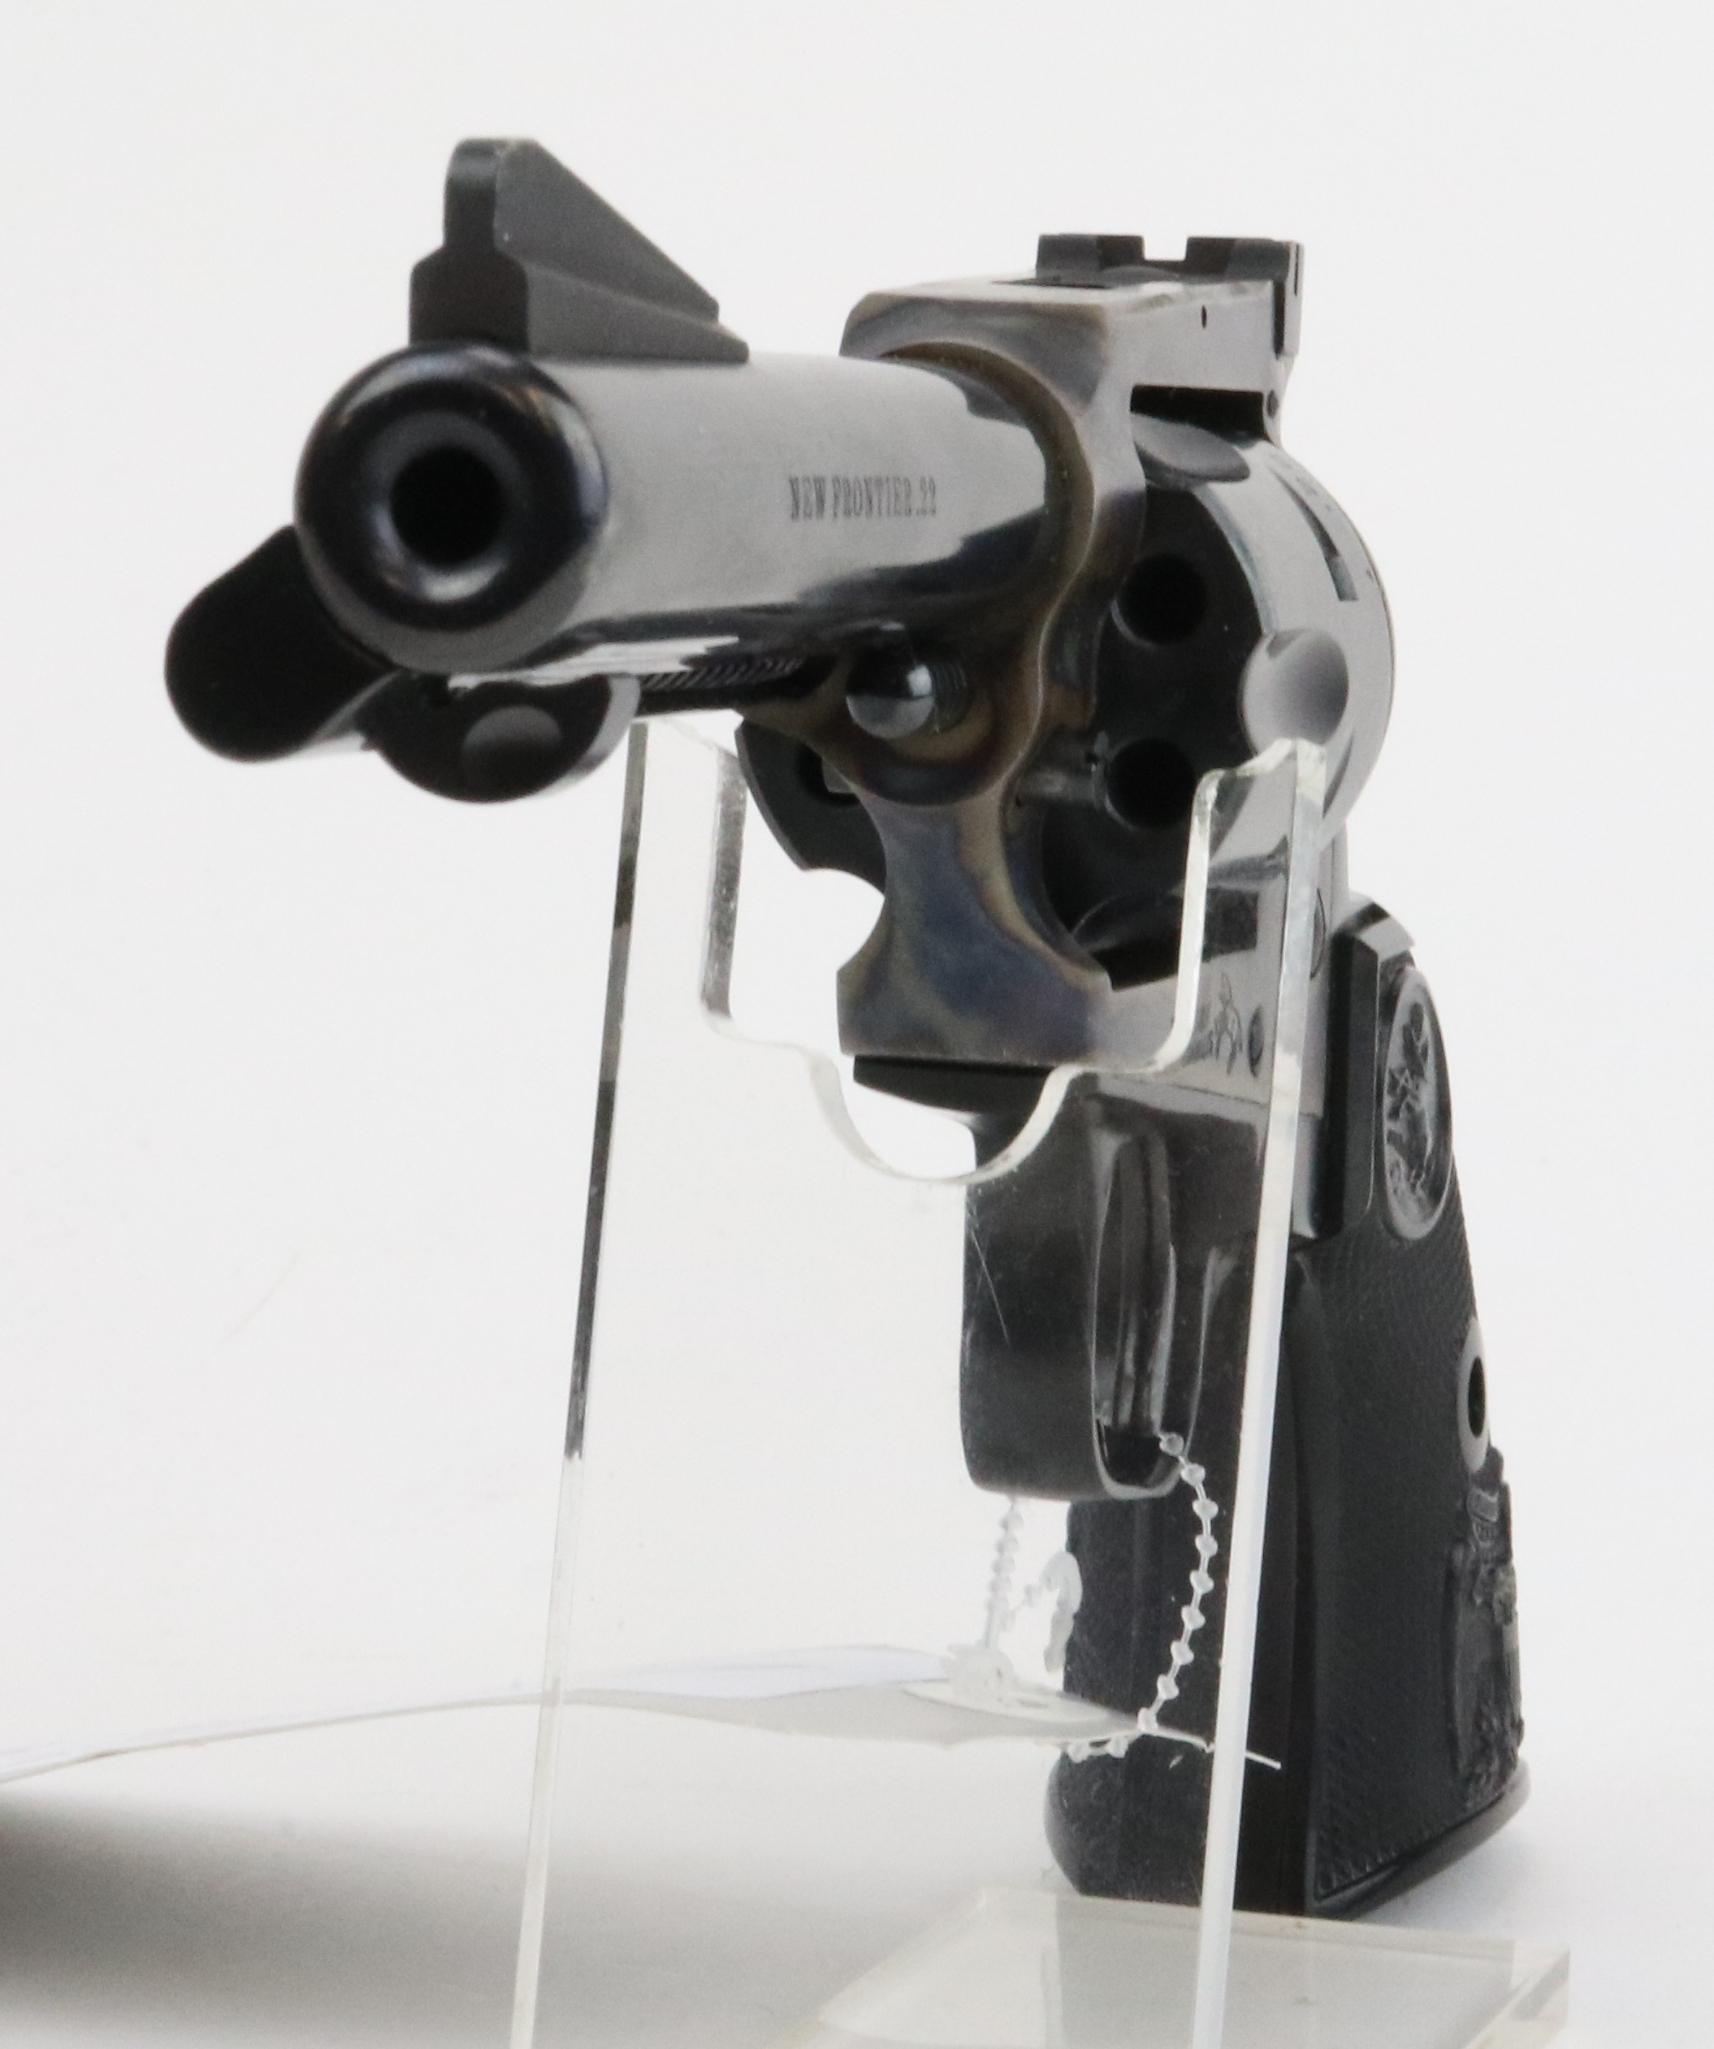 Colt New Frontier 22 single action revolver.